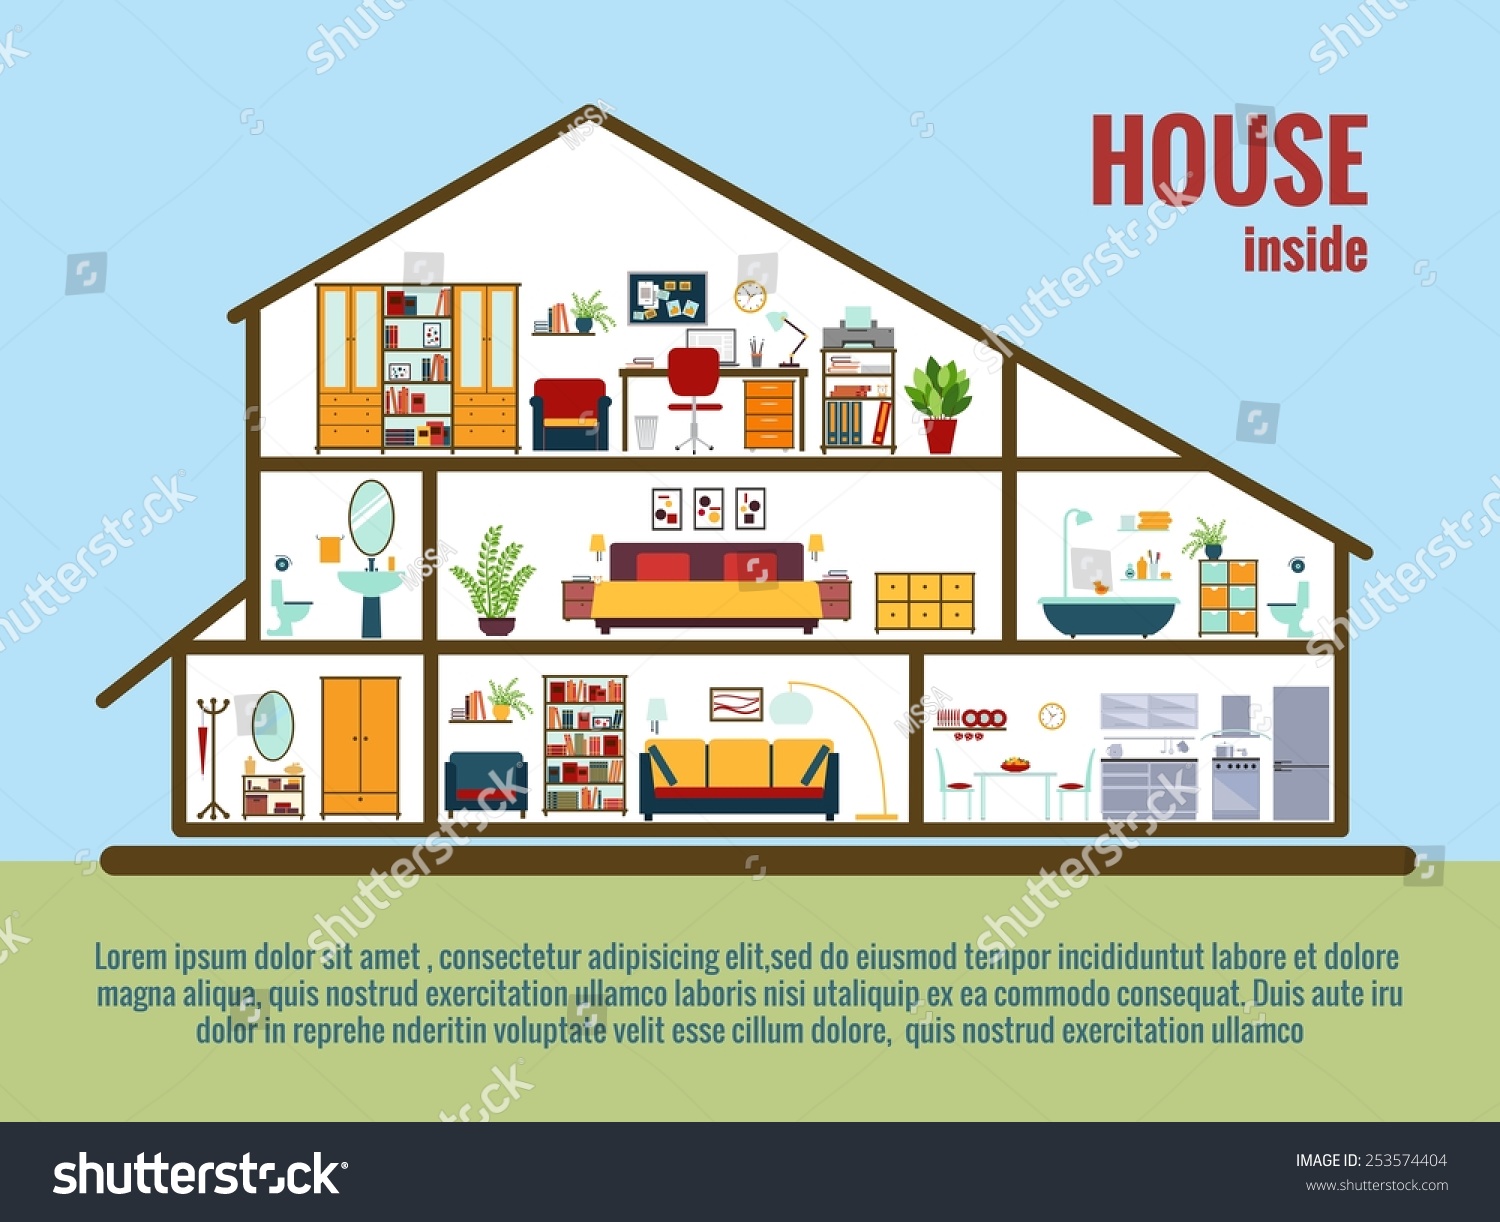 free clipart house plans - photo #19